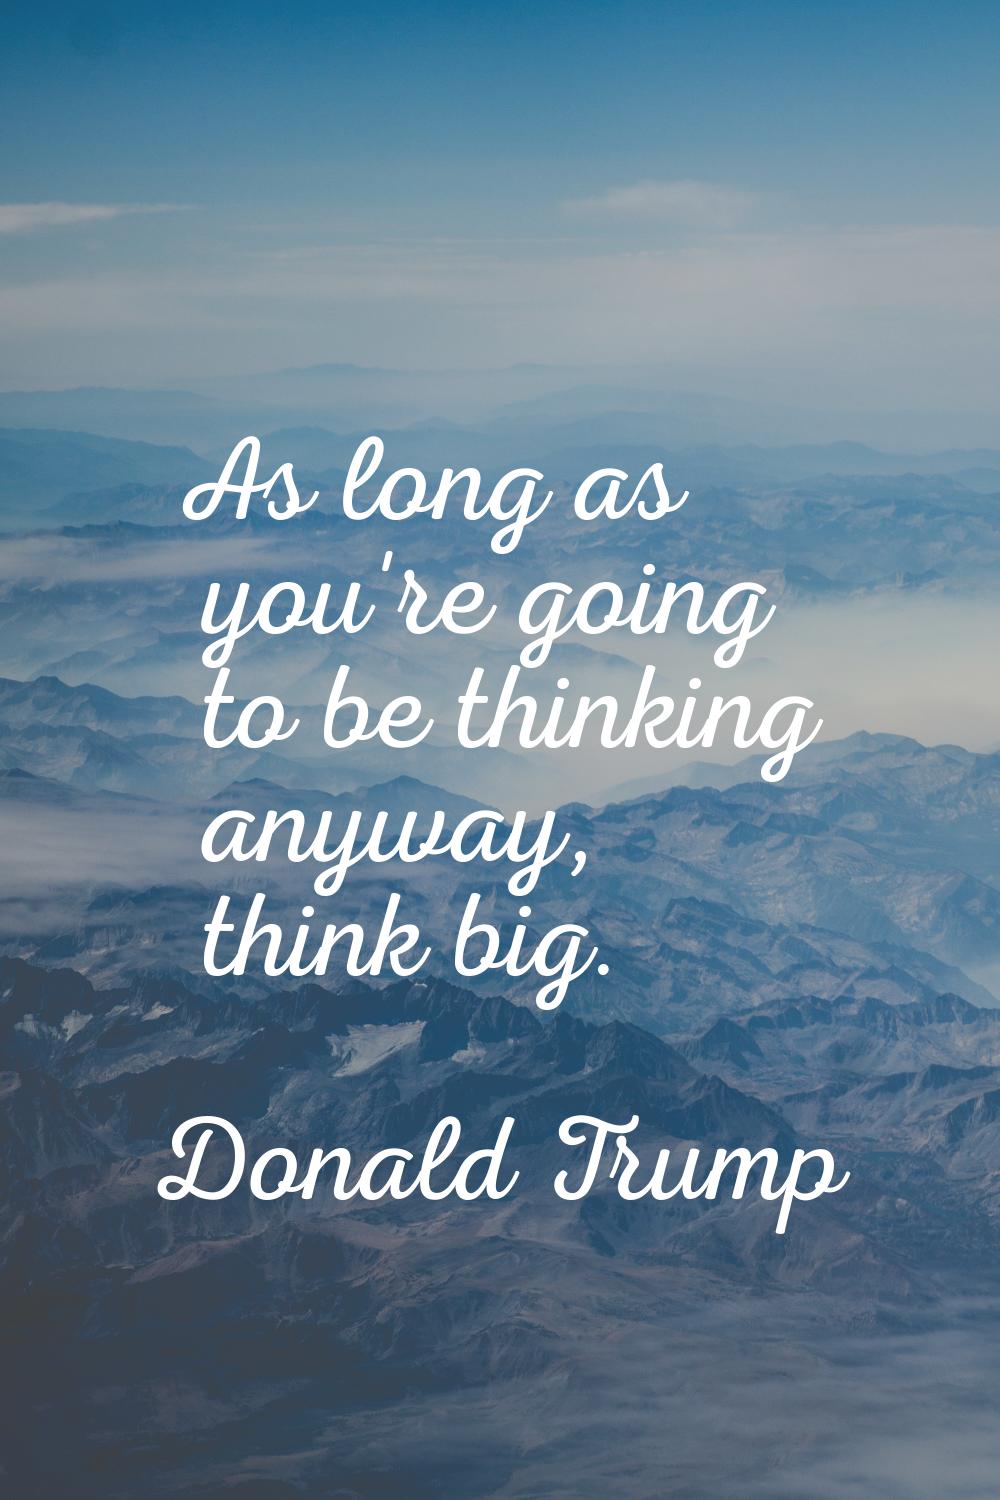 As long as you're going to be thinking anyway, think big.